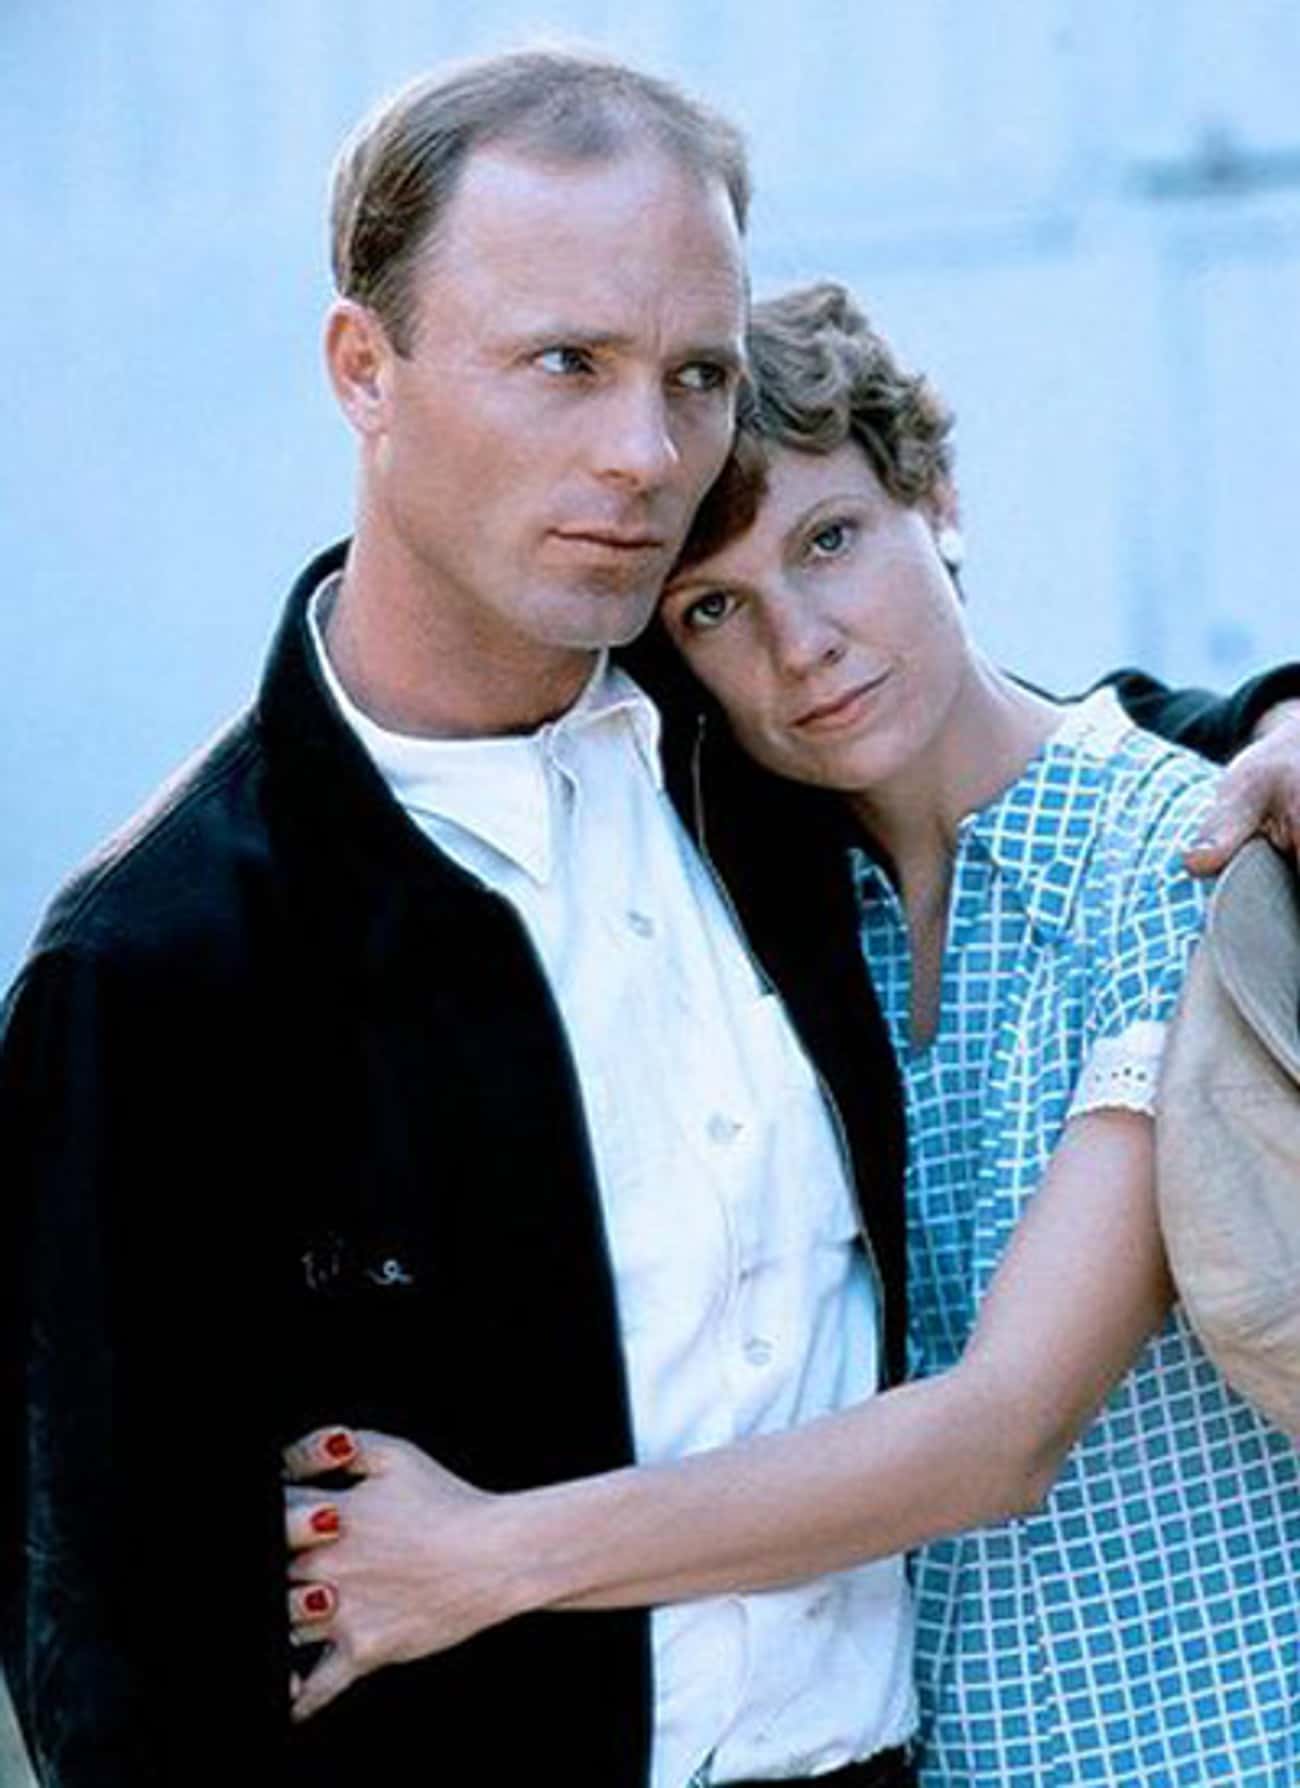 Young Ed Harris in White Buttondown and Black Jacket